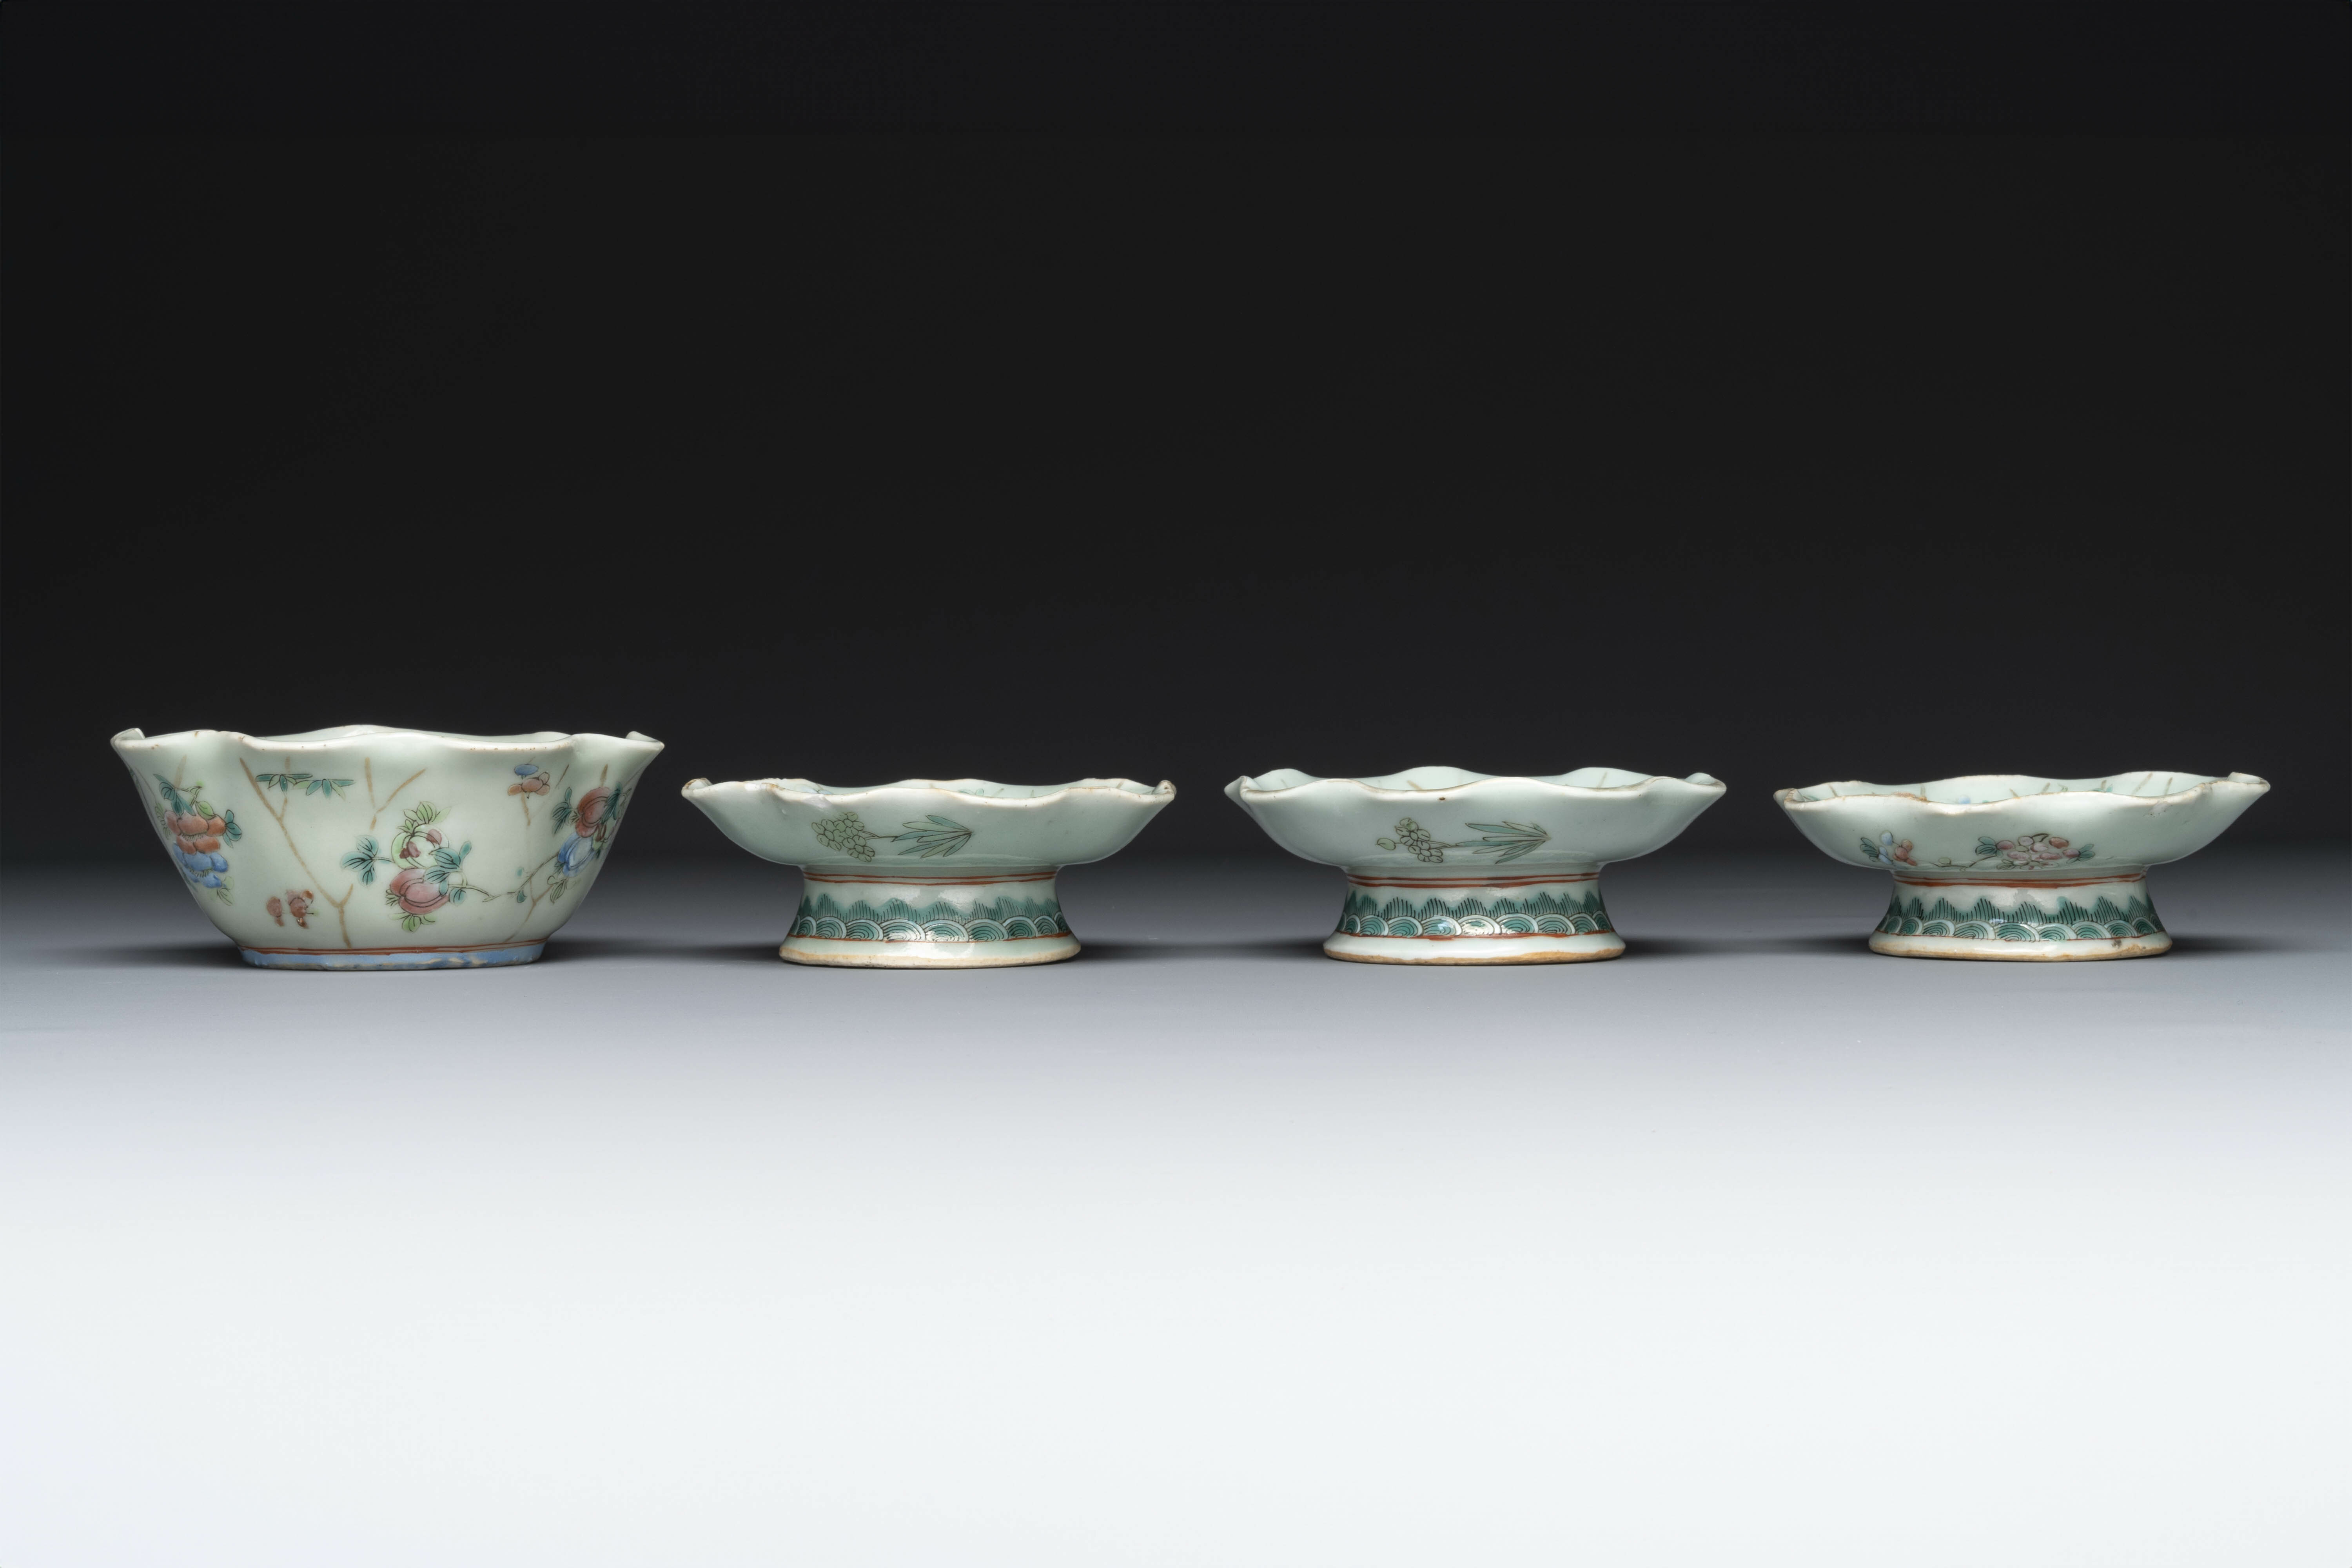 A varied collection of eight pieces of Chinese famille rose porcelain, 18/19th C. - Image 17 of 21